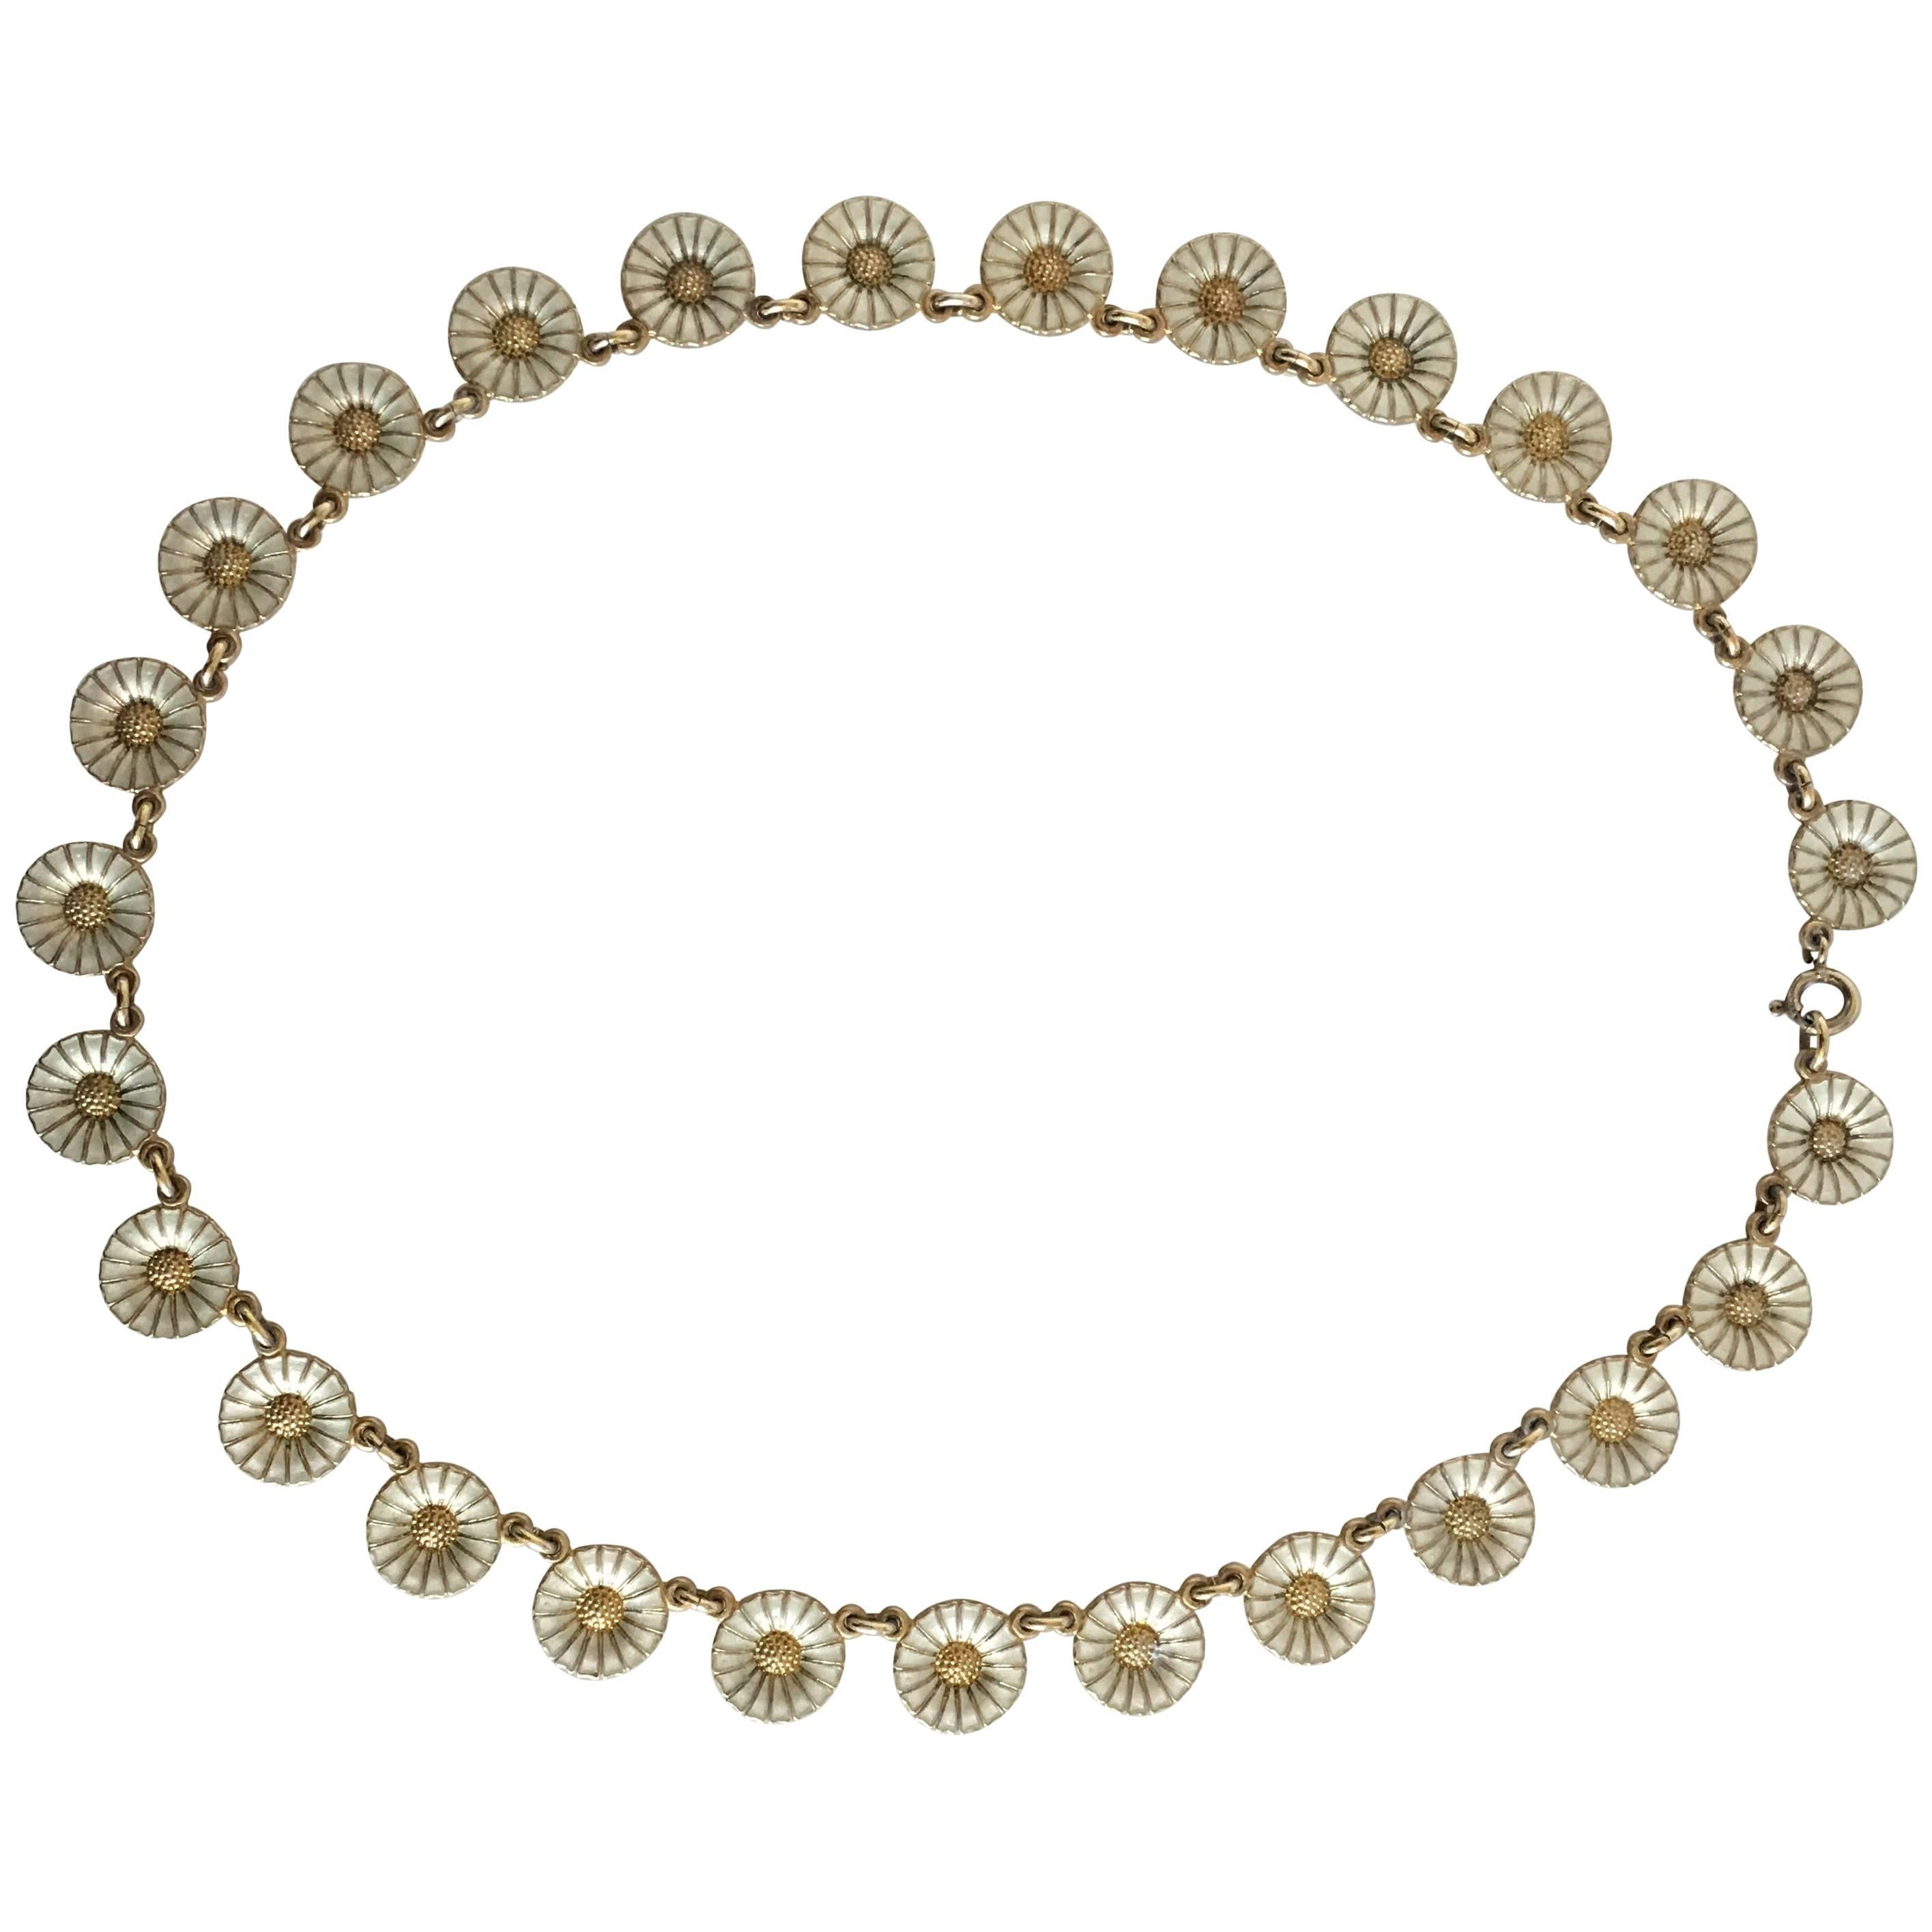 Anton Michelsen Daisy Necklace in Gilded Sterling Silver and White Enamel